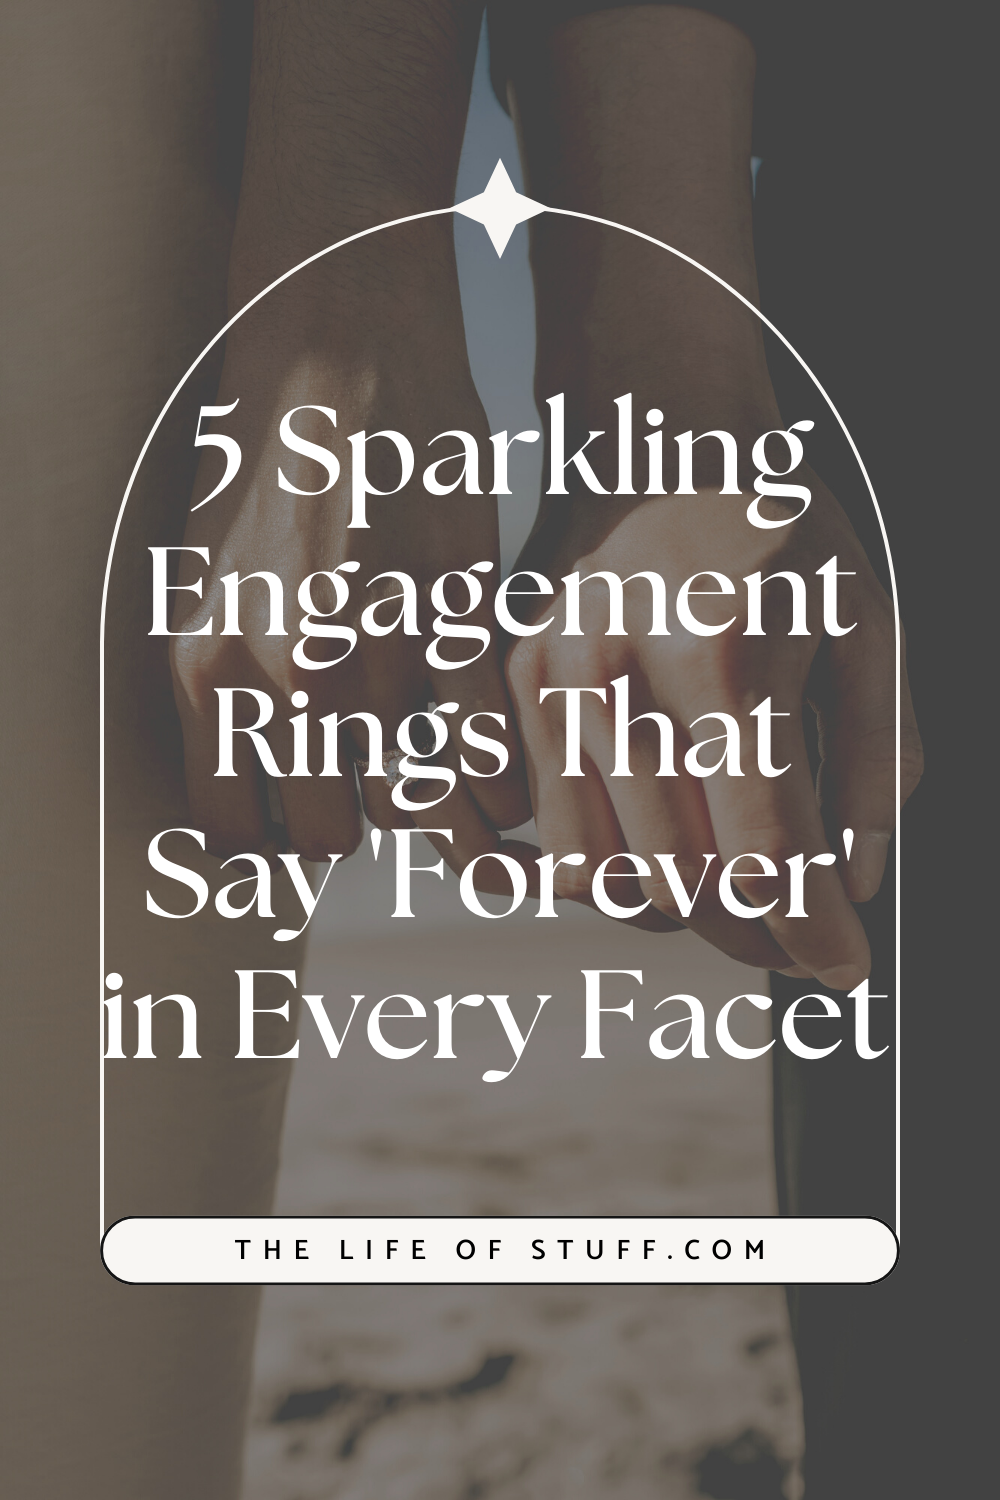 5 Sparkling Engagement Rings That Say 'Forever' in Every Facet - The Life of Stuff